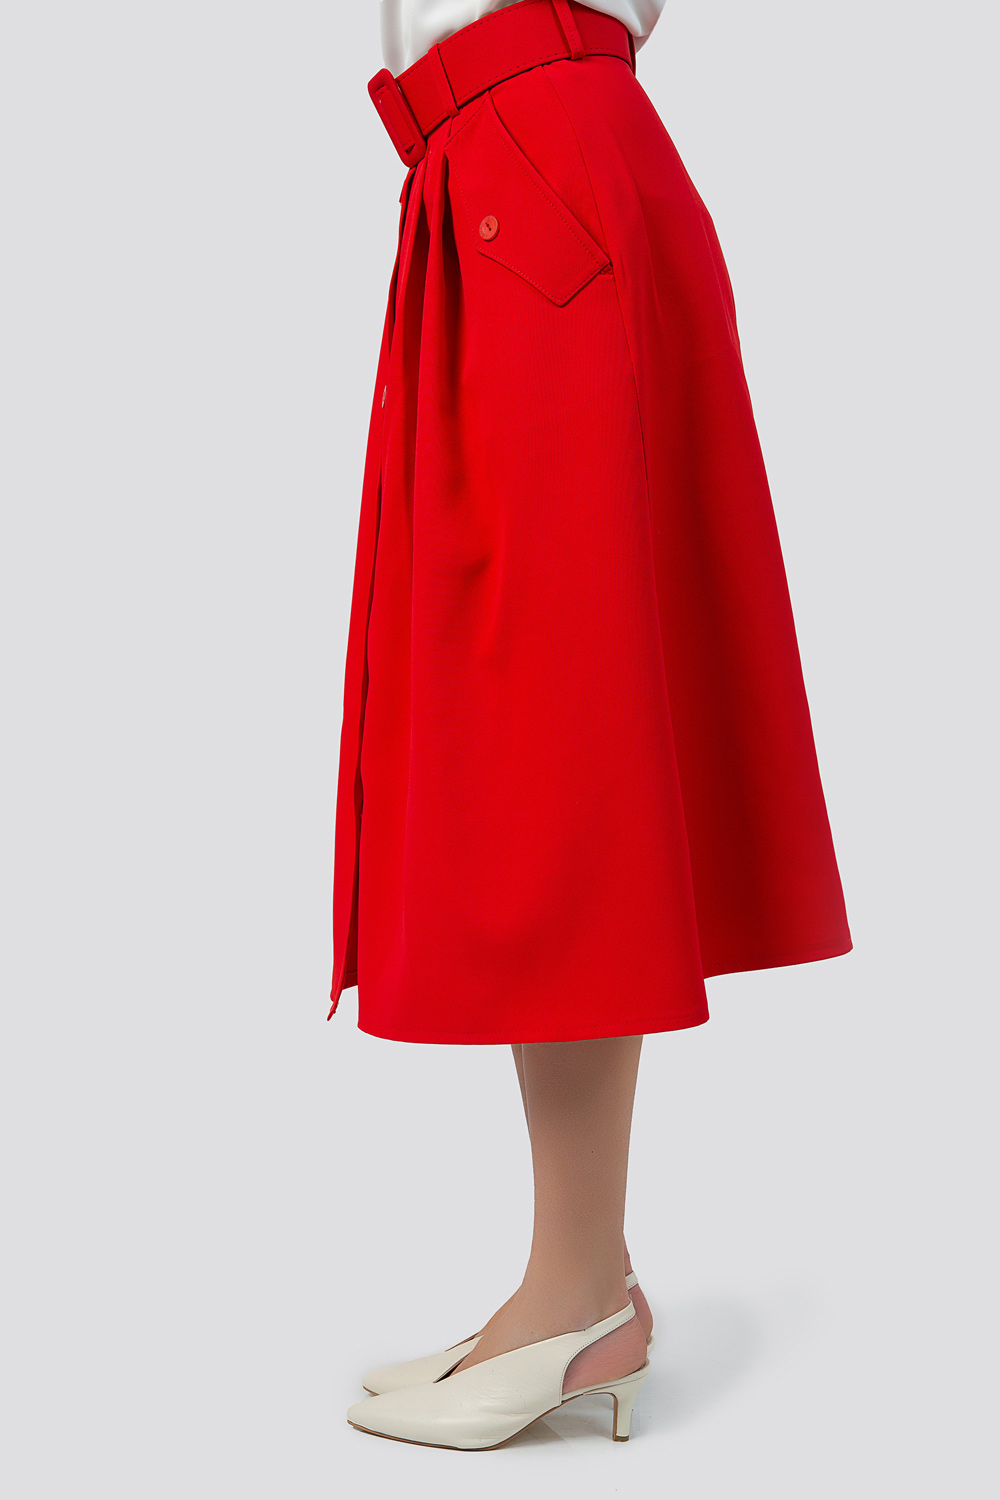 Flared red skirt with a belt